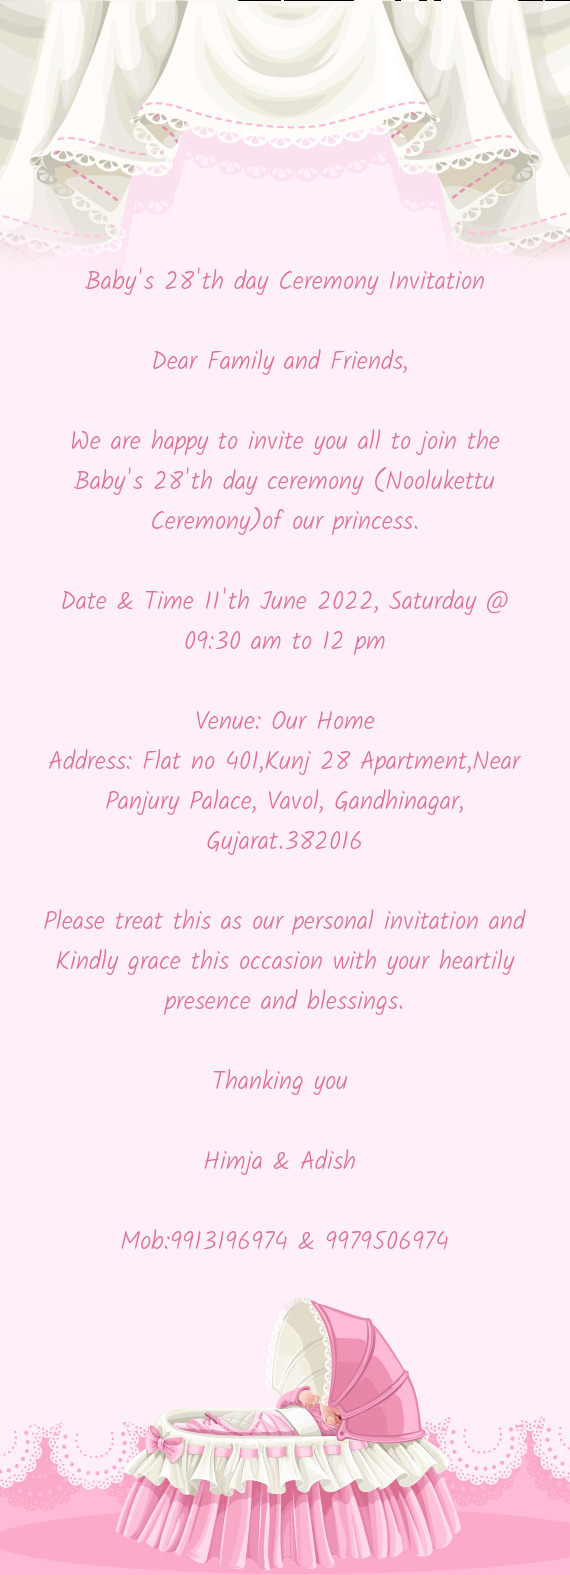 We are happy to invite you all to join the Baby